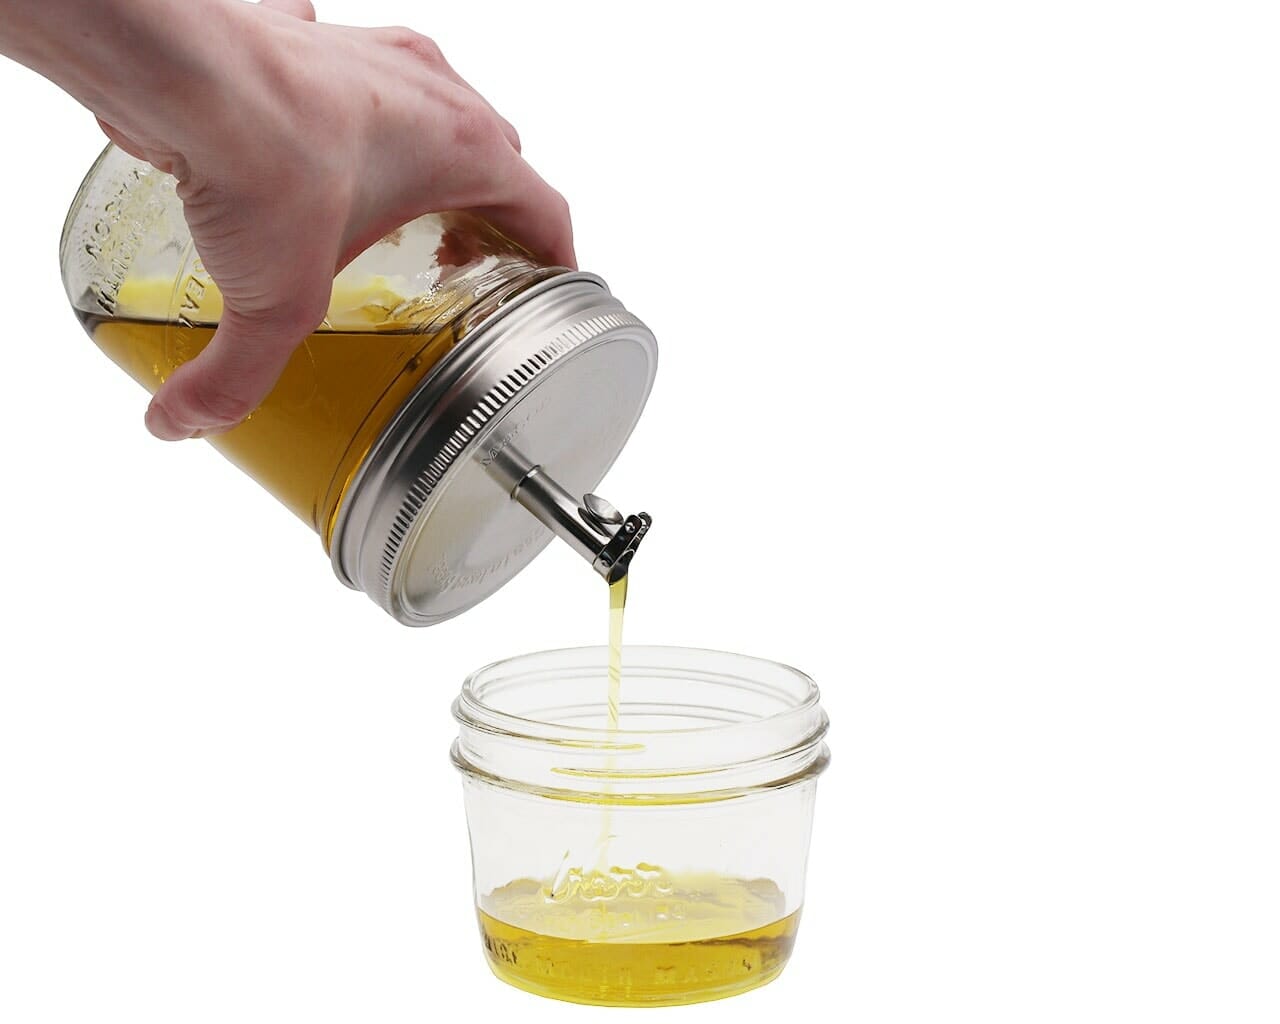 mason-jar-lifestyle-stainless-steel-pour-spout-oil-cruet-lid-wide-mouth-ball-olive-oil-pouring